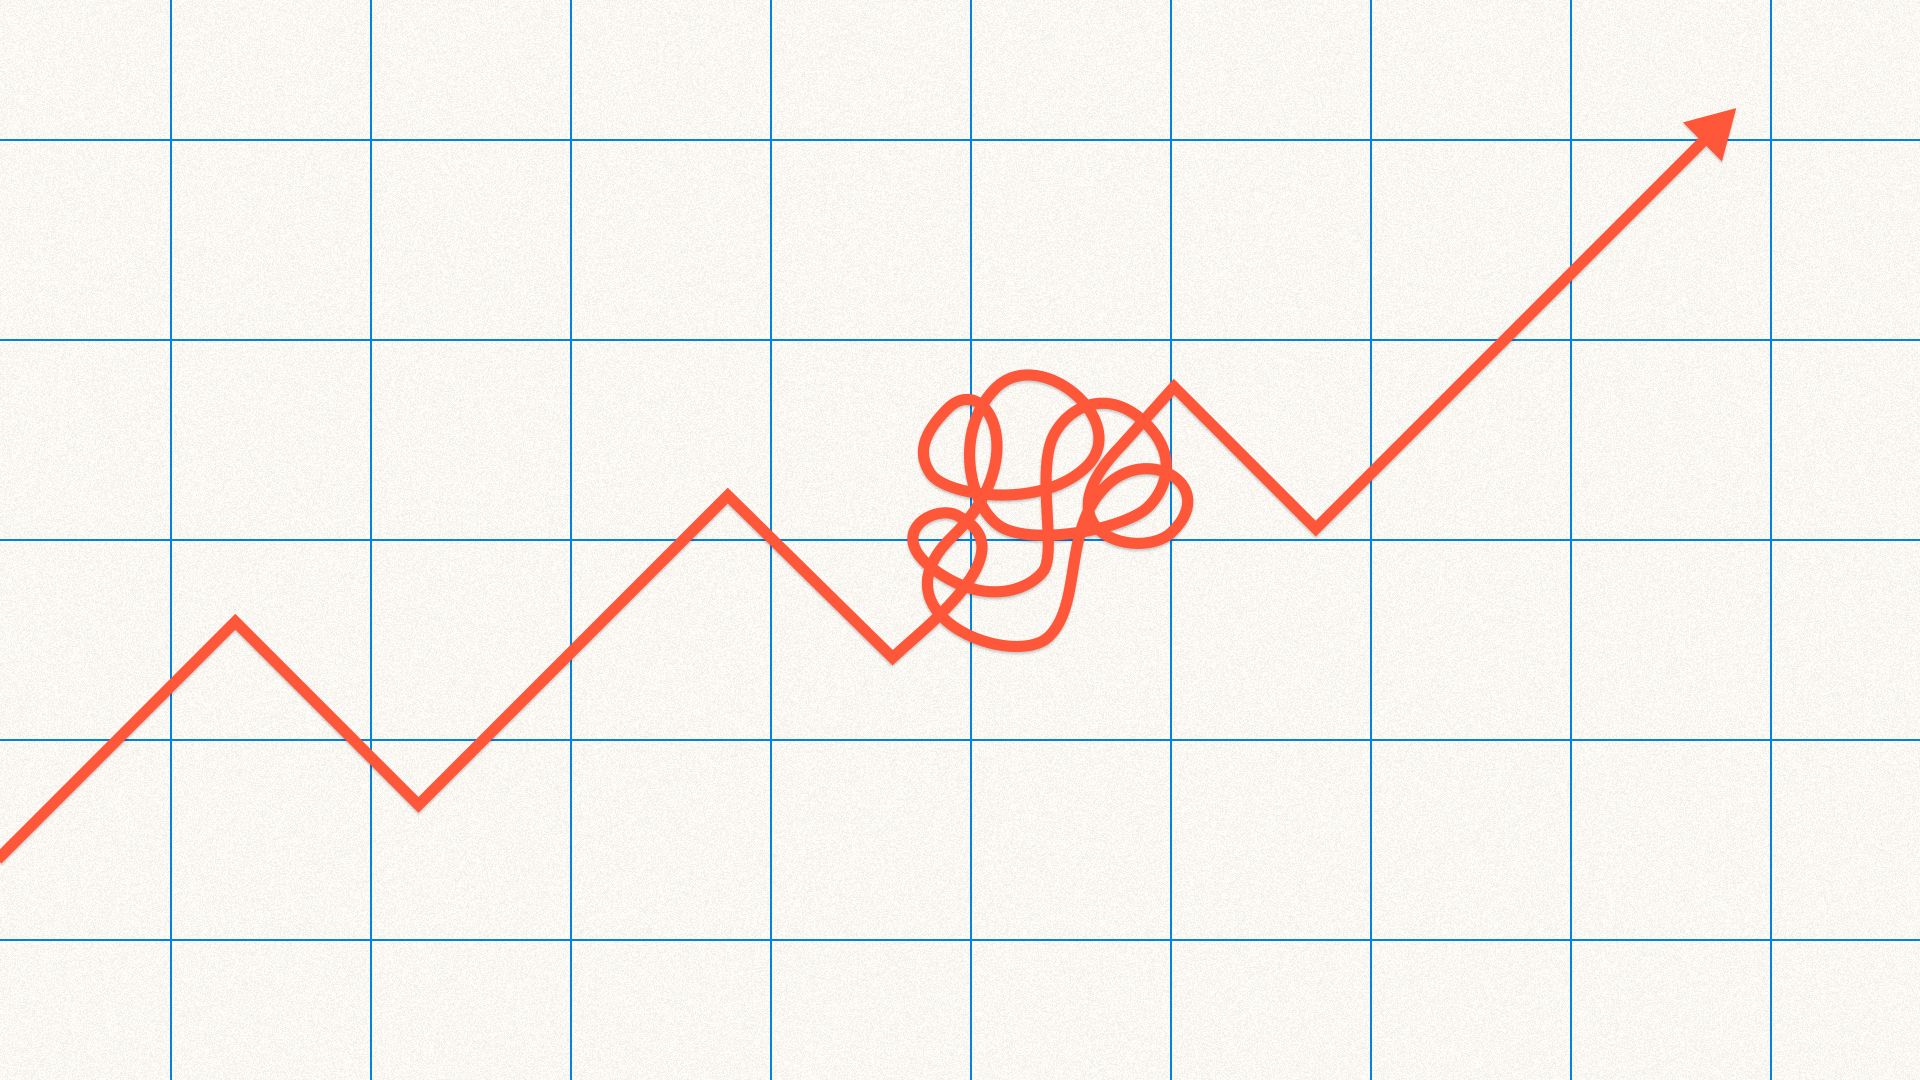 Illustration of an upward trending line graph with a knot in the middle